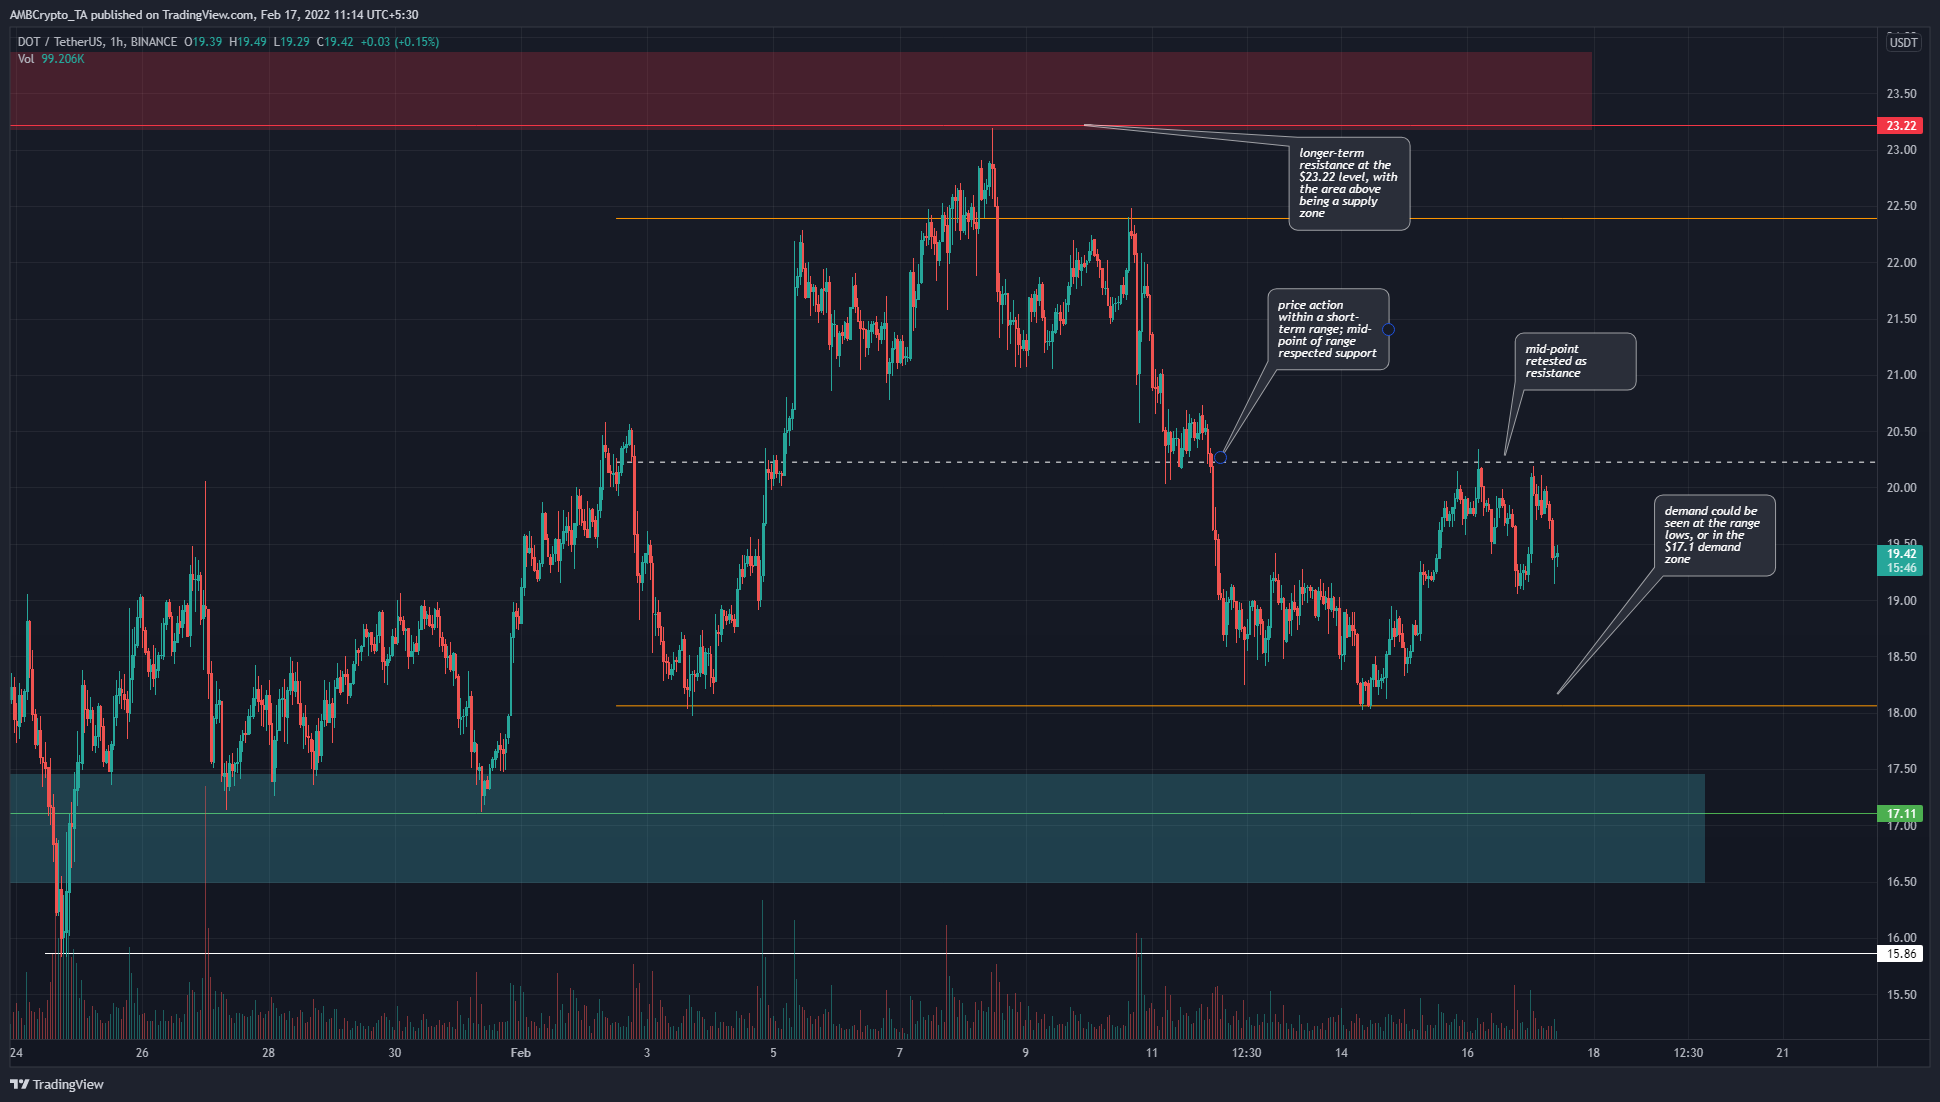 Polkadot trades within a range but could drop to this demand zone